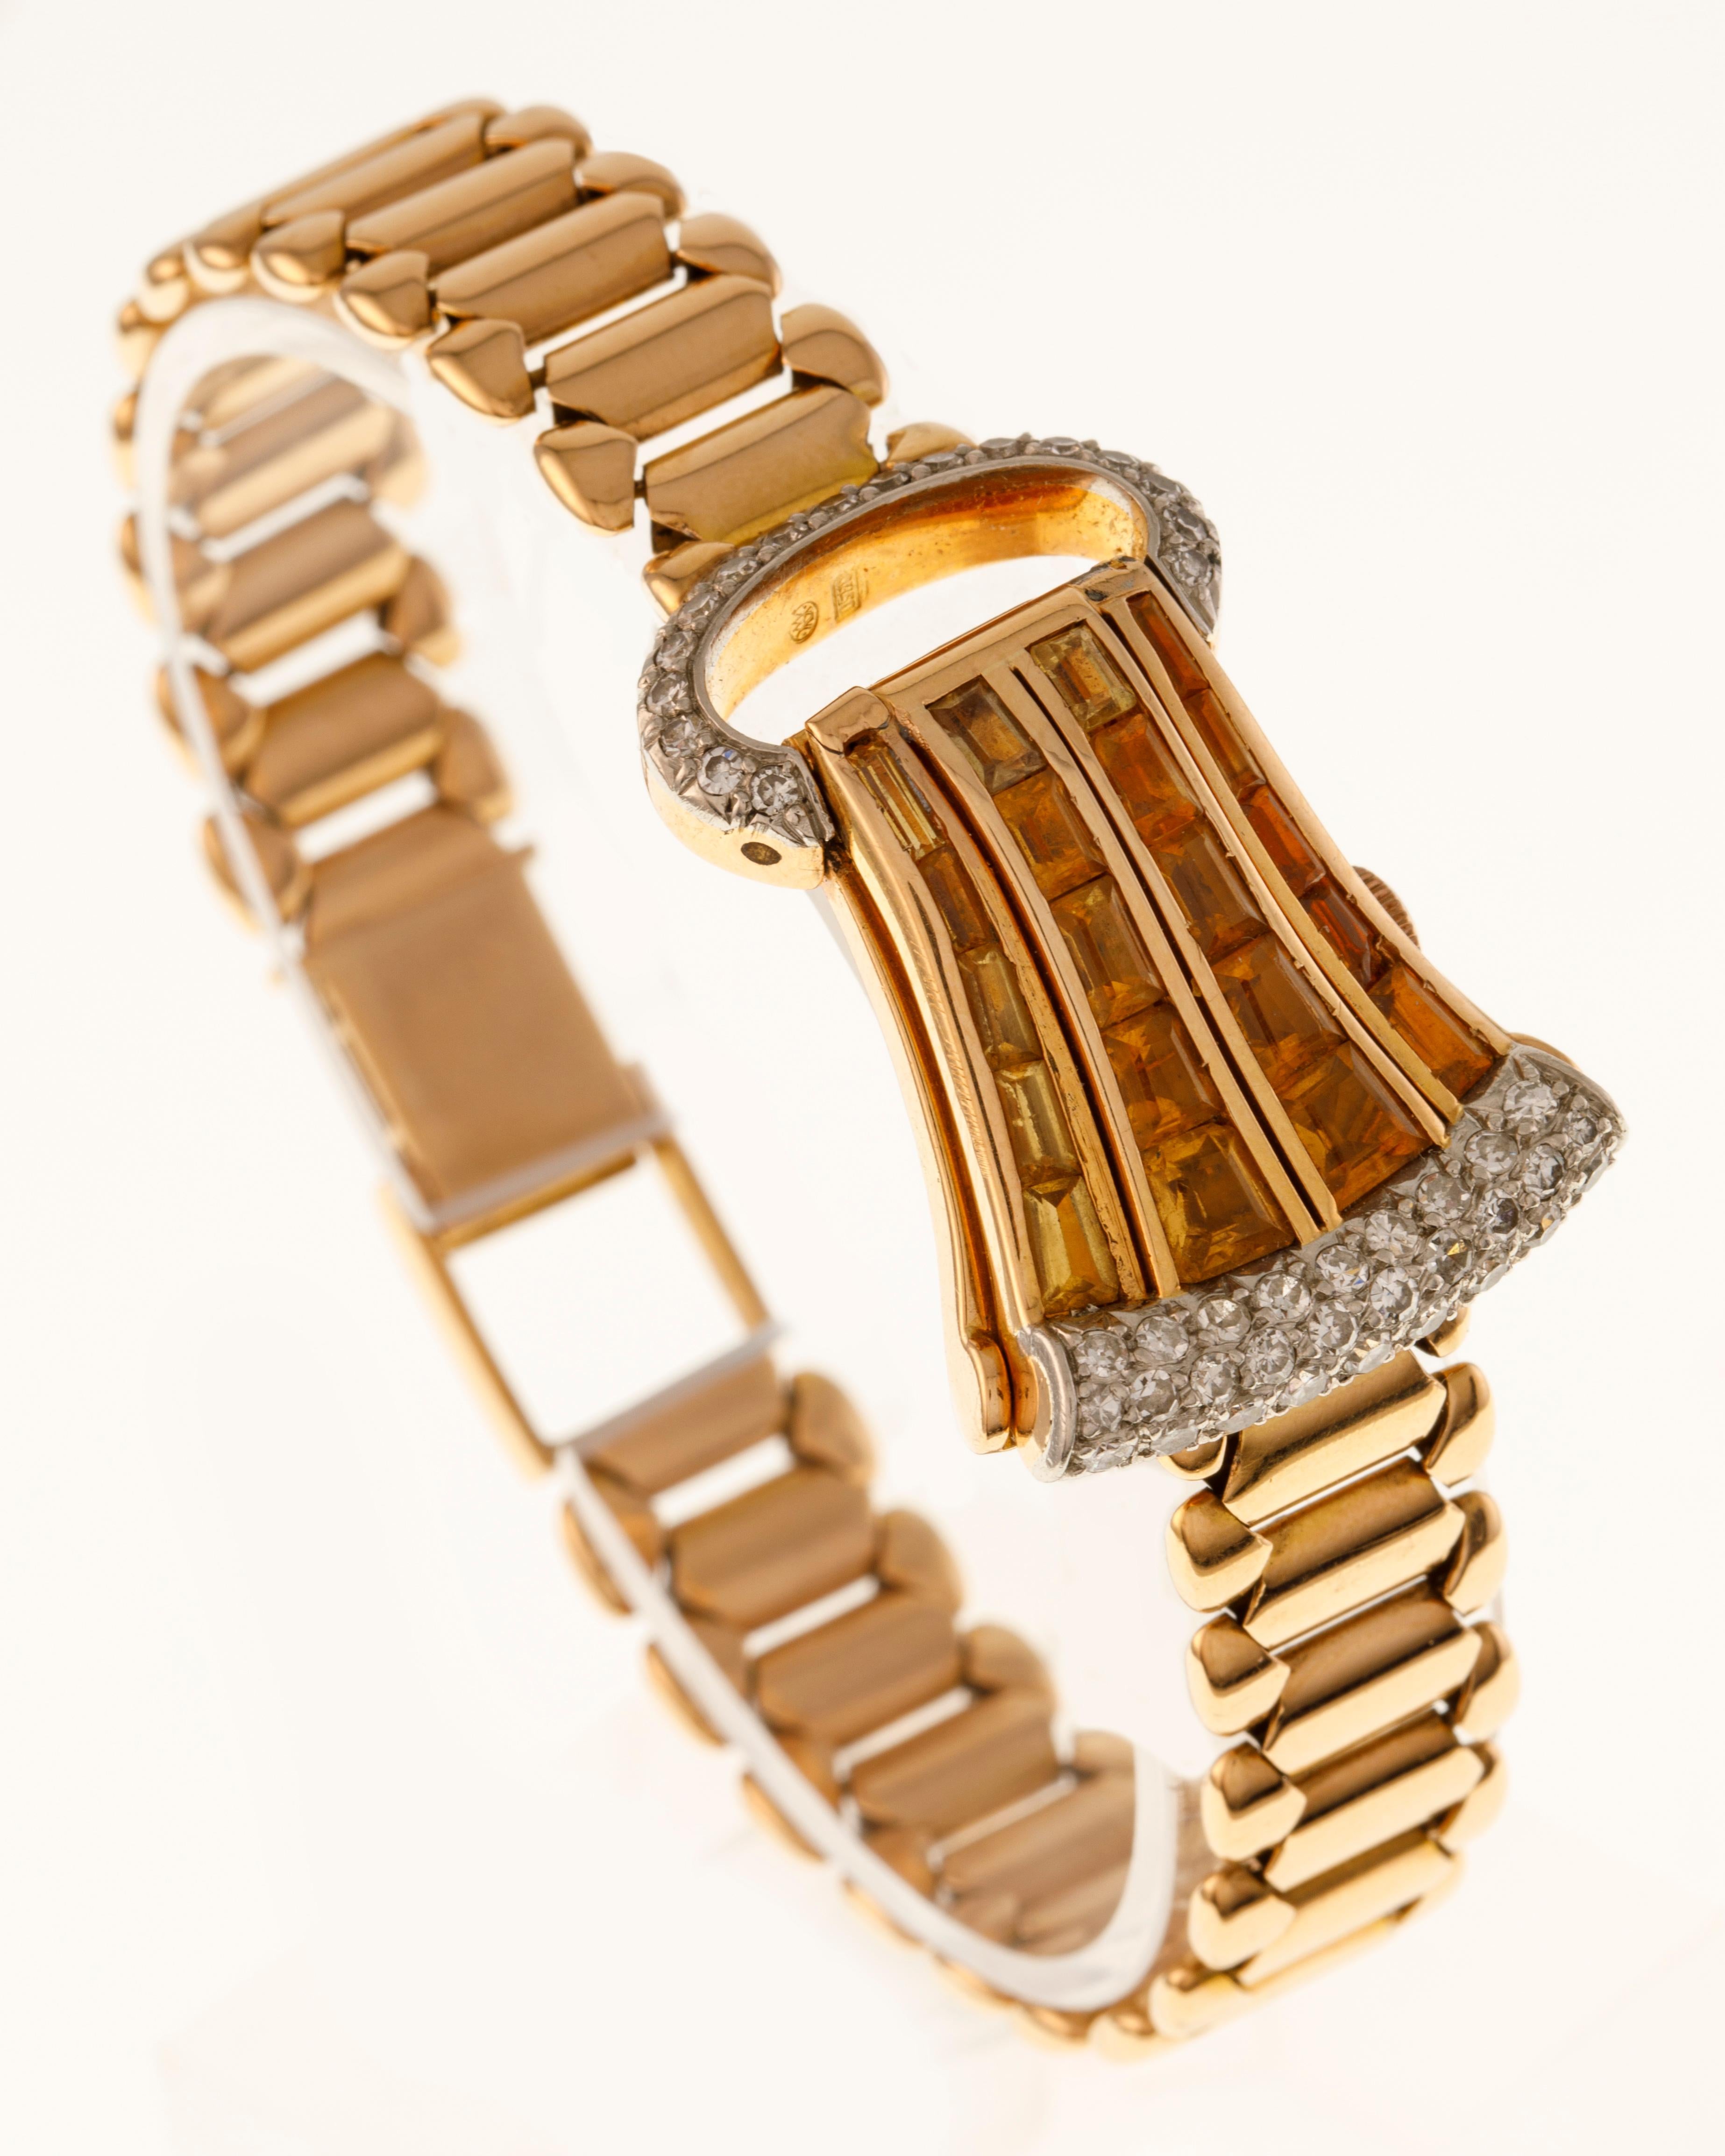 This refined Universal Genève jewel watch in 18kt rose gold features the caché dial hidden by a shell clasp embellished with citrine quartz and huit-huit cut diamonds. Cash box n. 147148 of asymmetrical shape, with hinged back, has a mobile handle